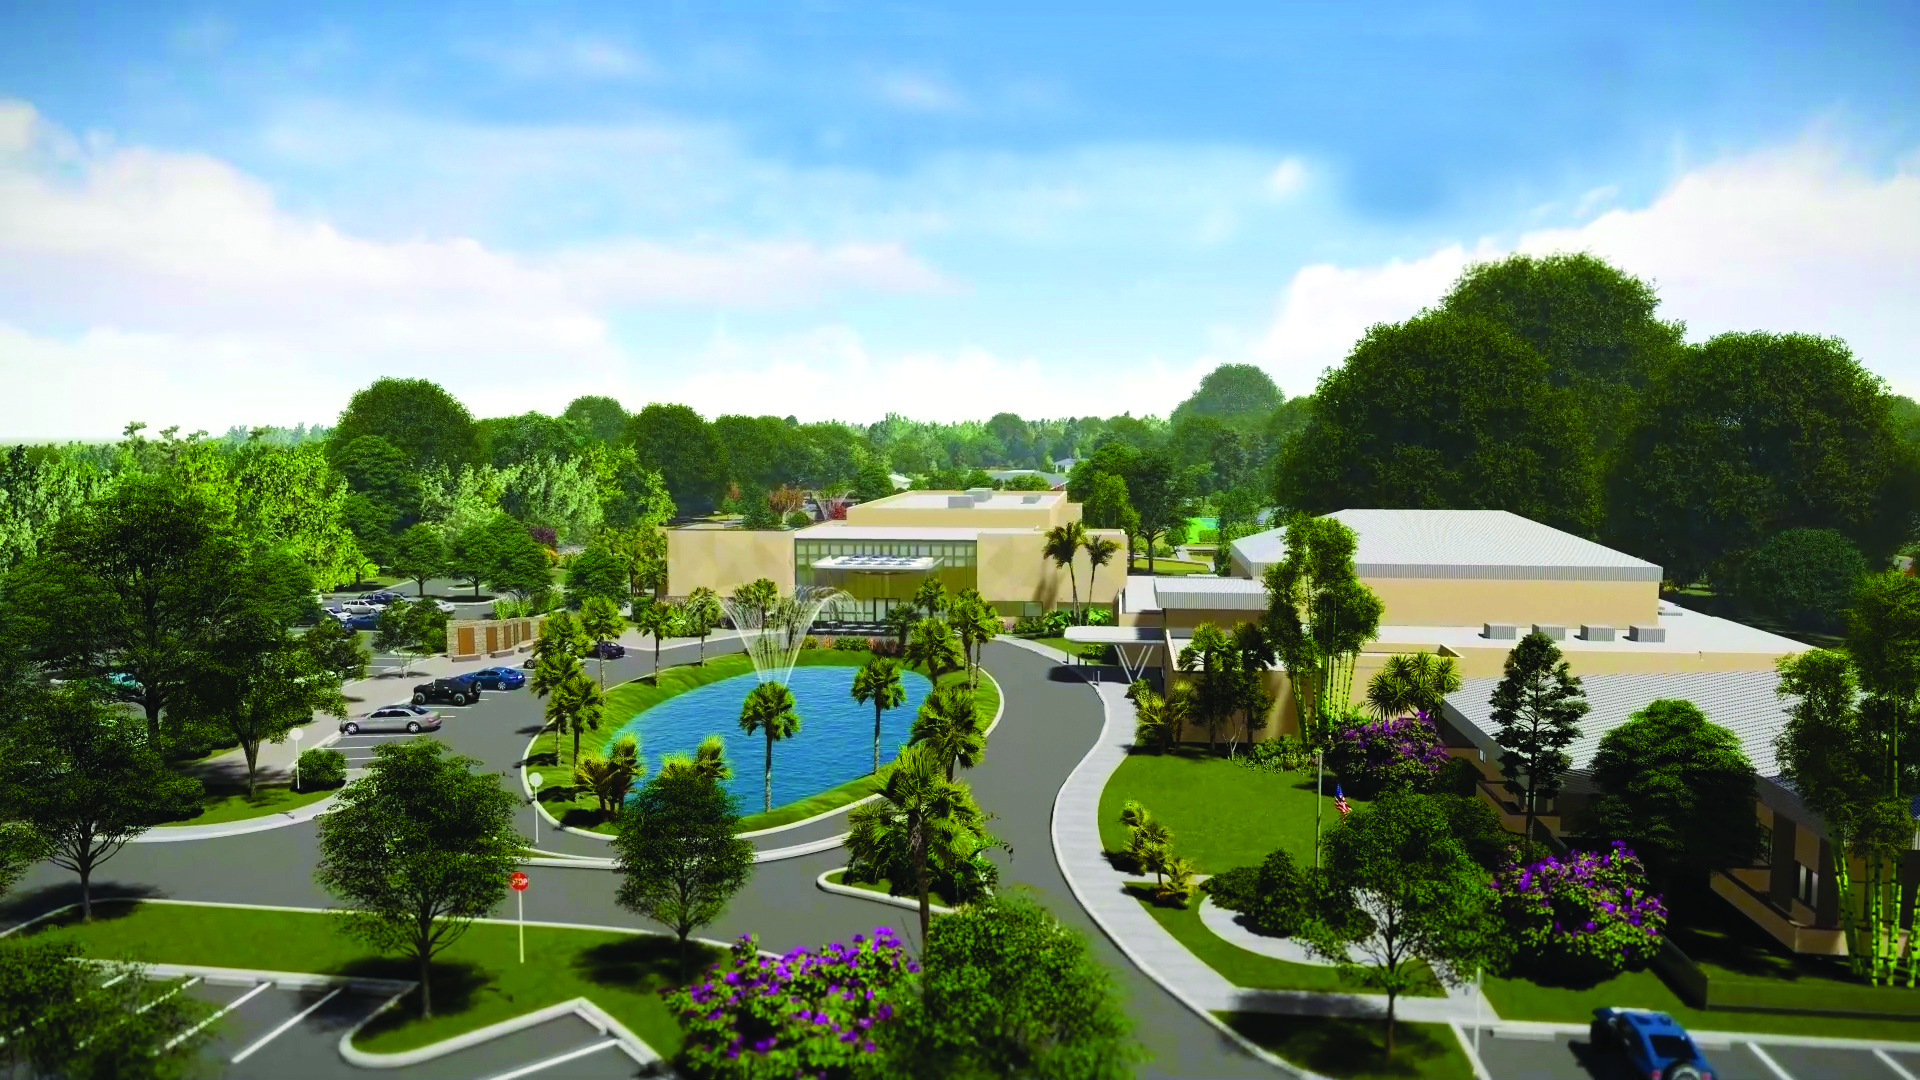 Courtesy. The Jewish Federation of Sarasota-Manatee is building up its 33-acre campus to bring the community together in a safe space.